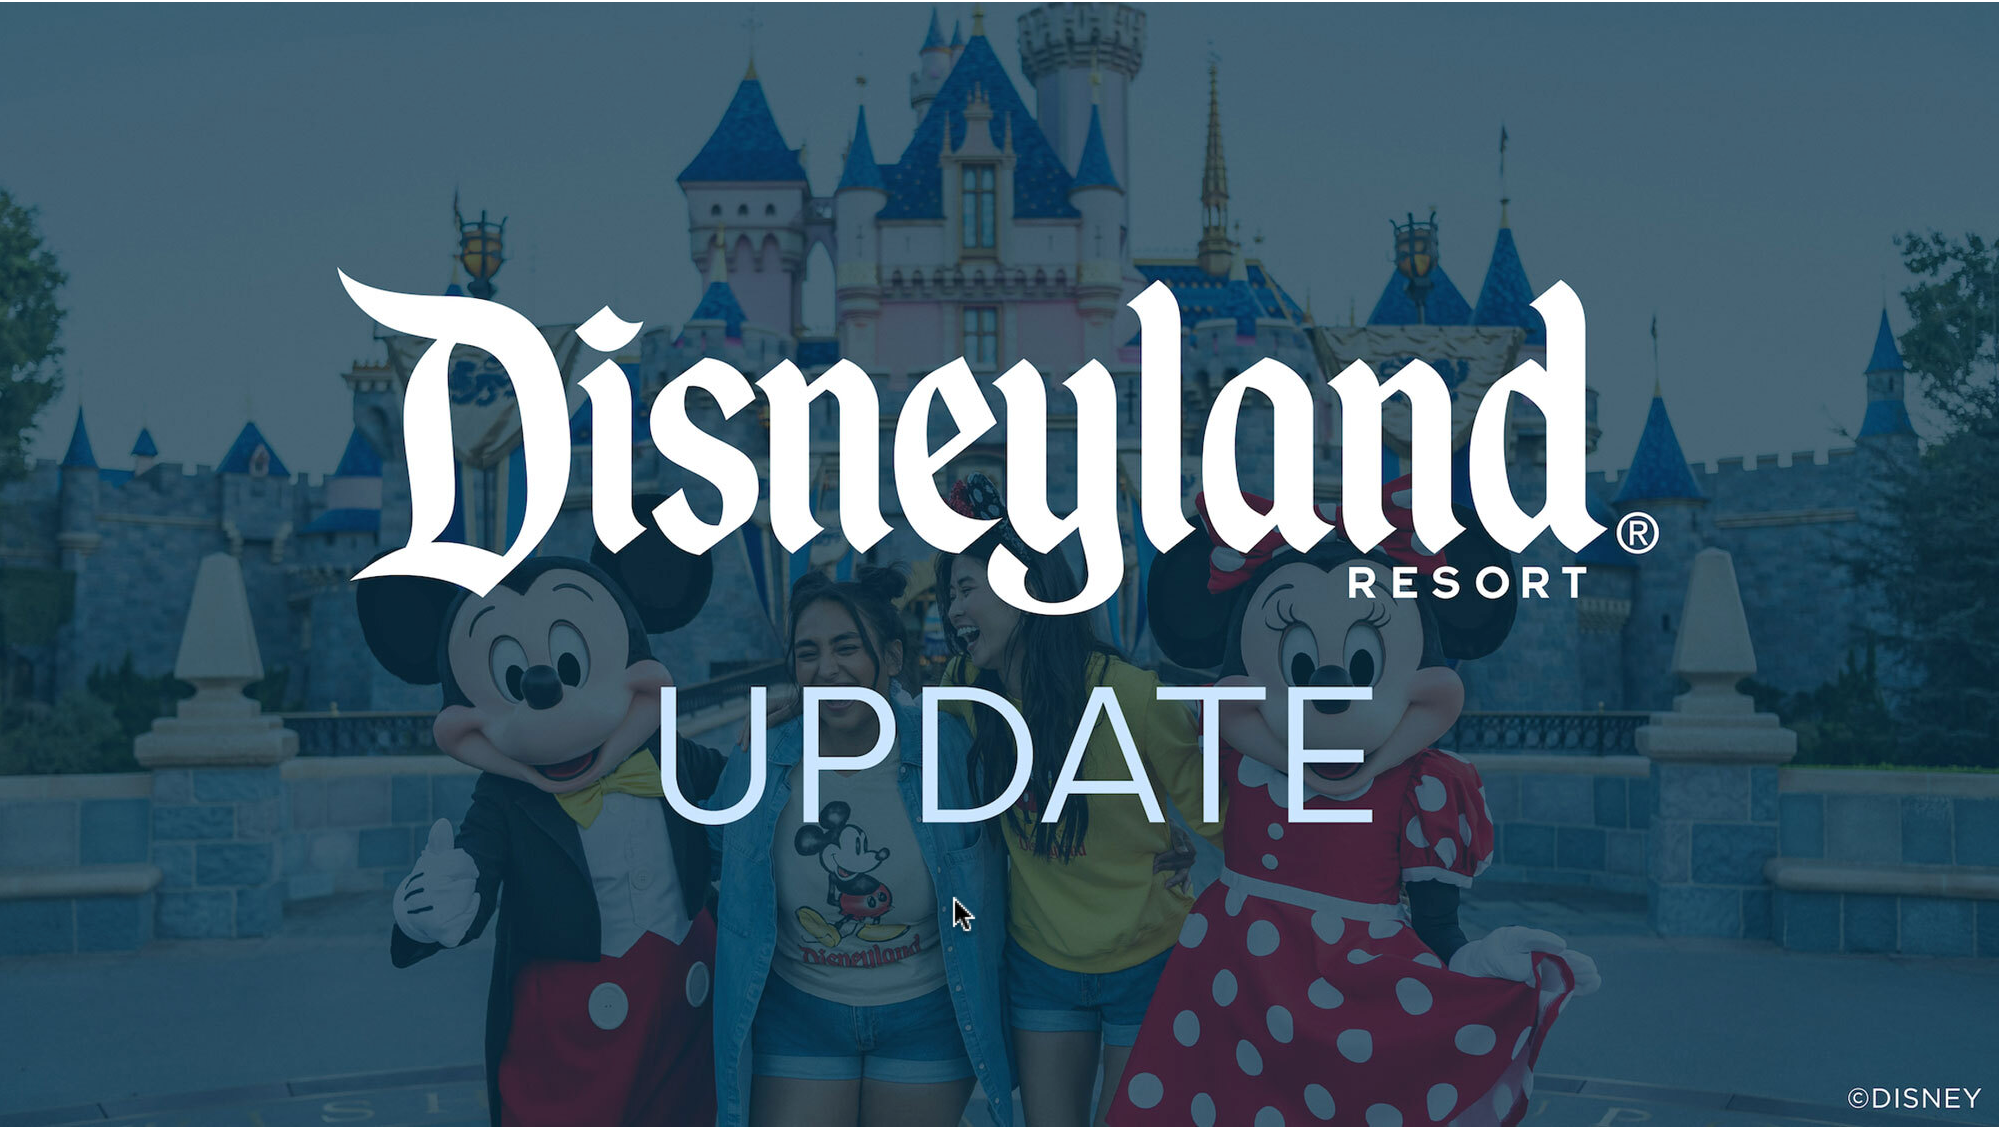 Disneyland Resort Announces New Updates to Offer Guests More Value and Flexibility